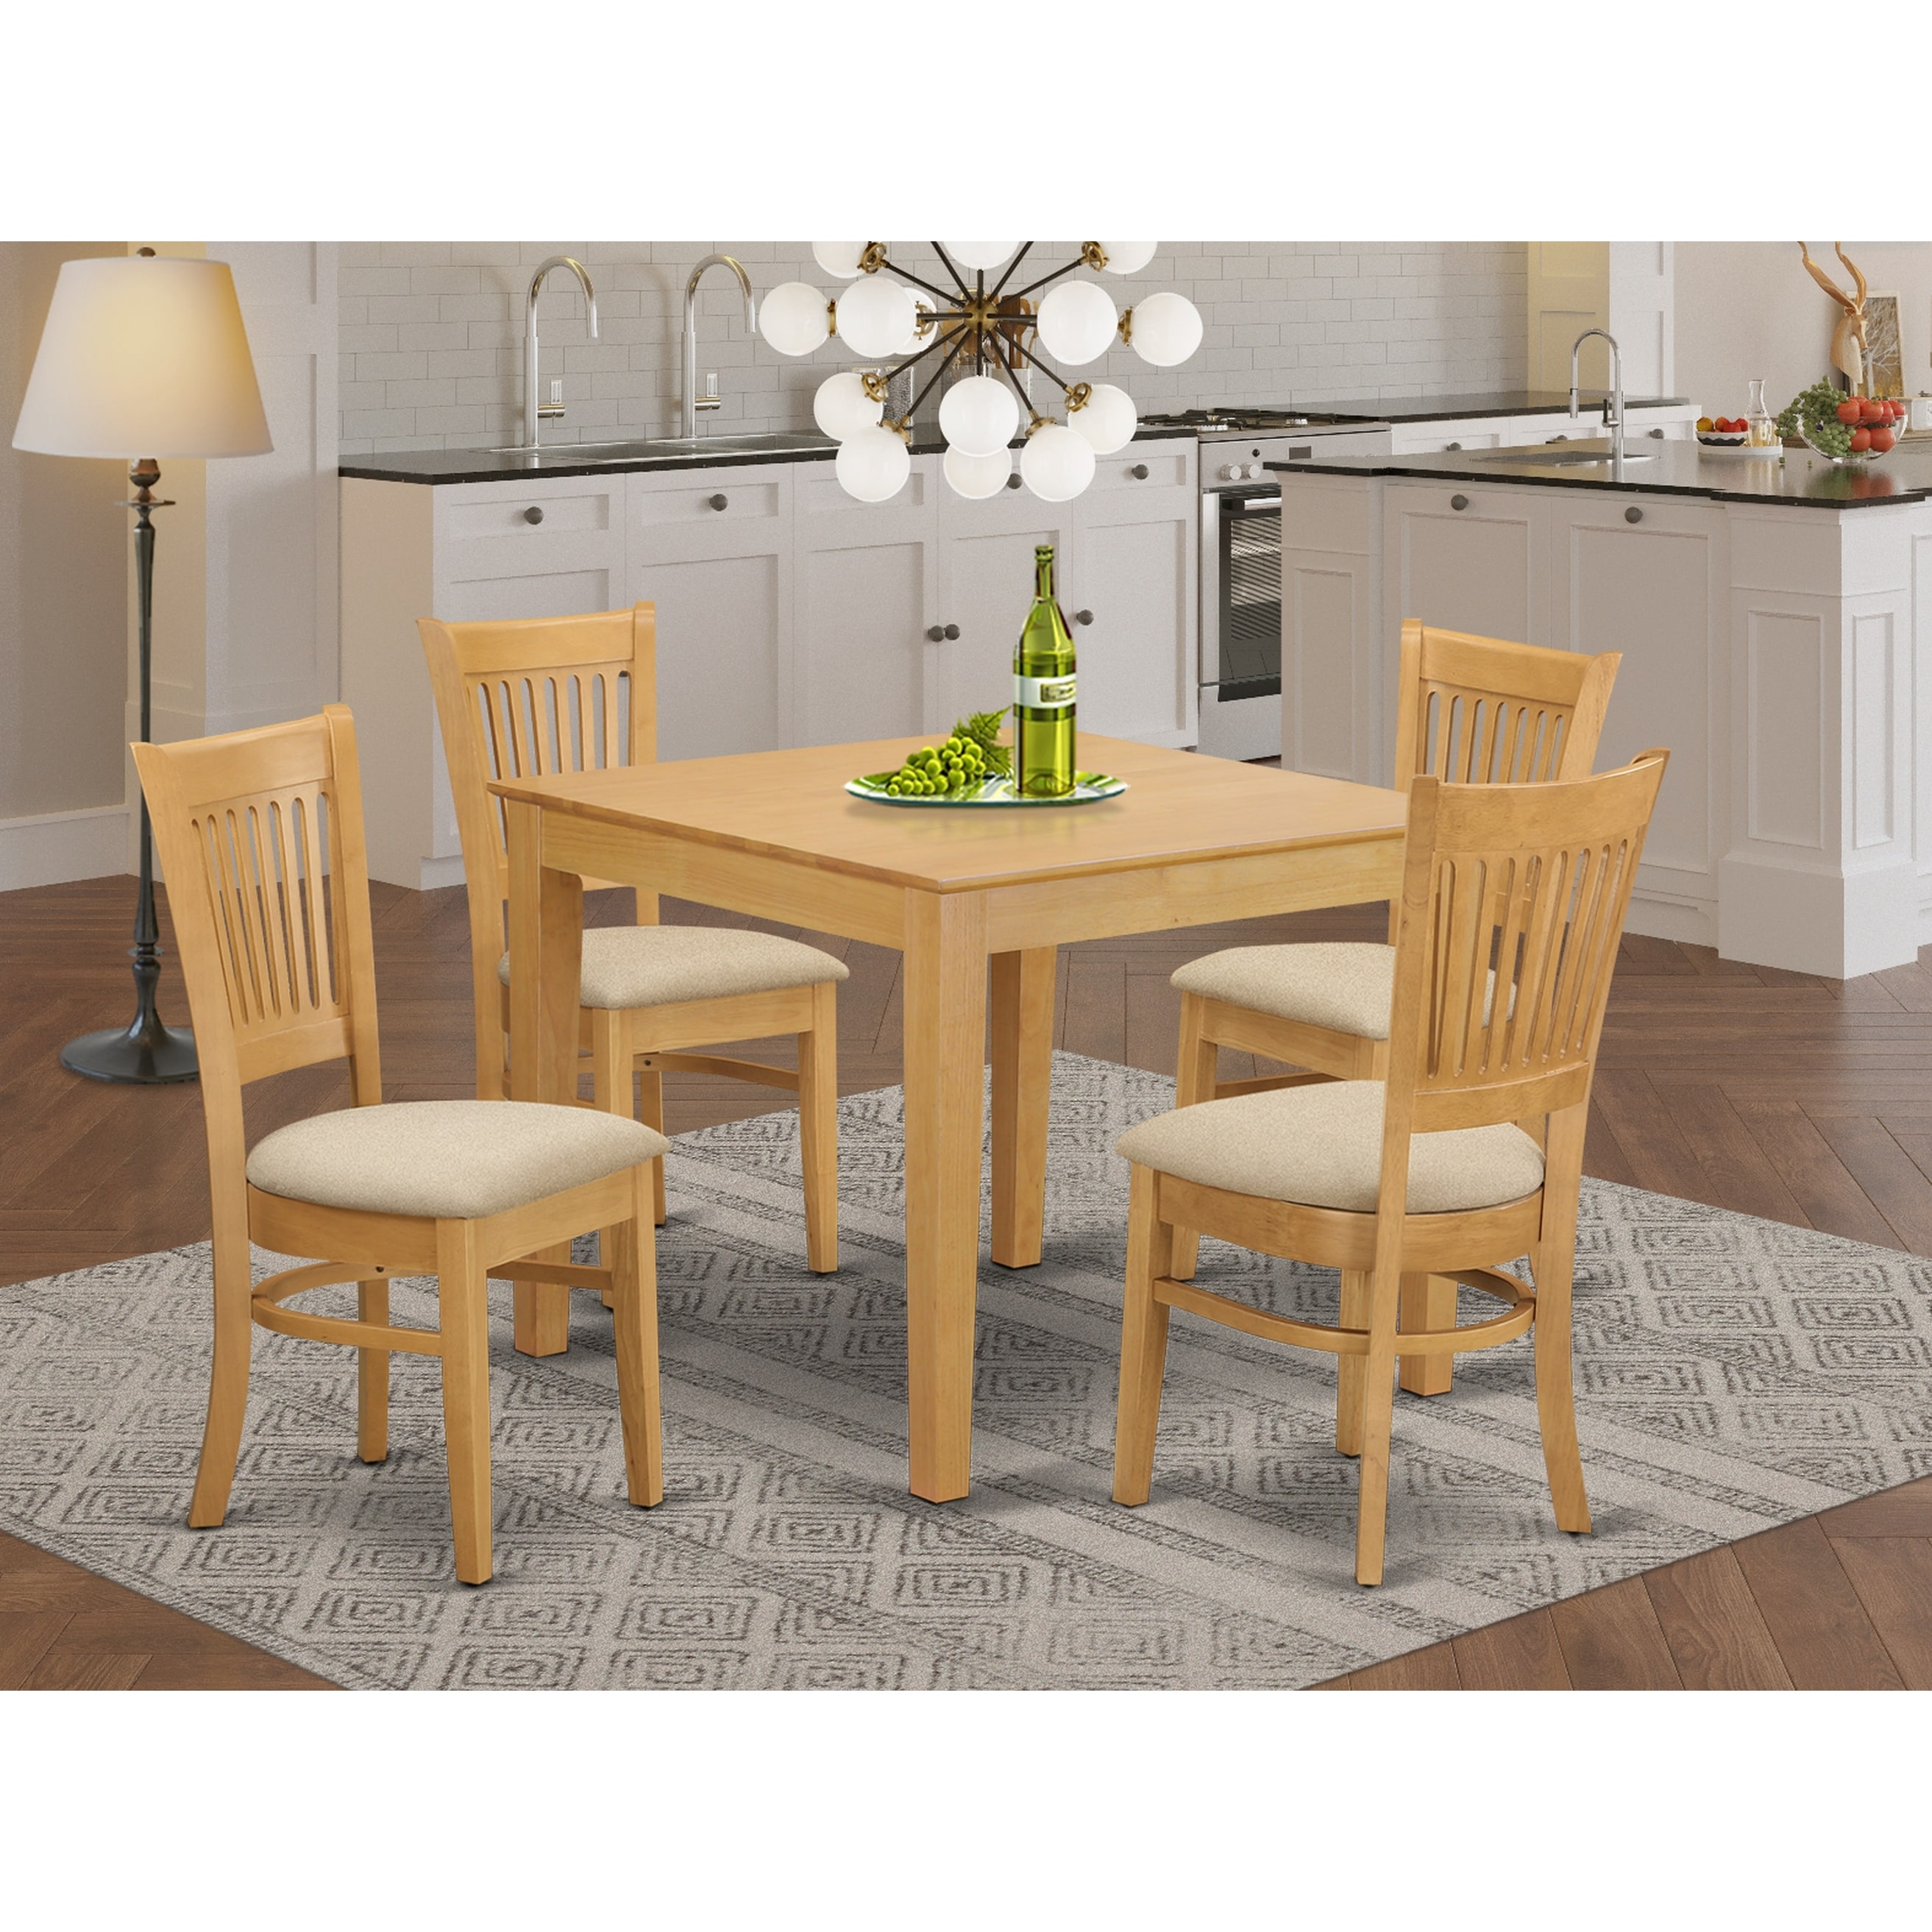 Shop 5 Piece Oak Square Kitchen Table And Chairs Set Overstock 14366618